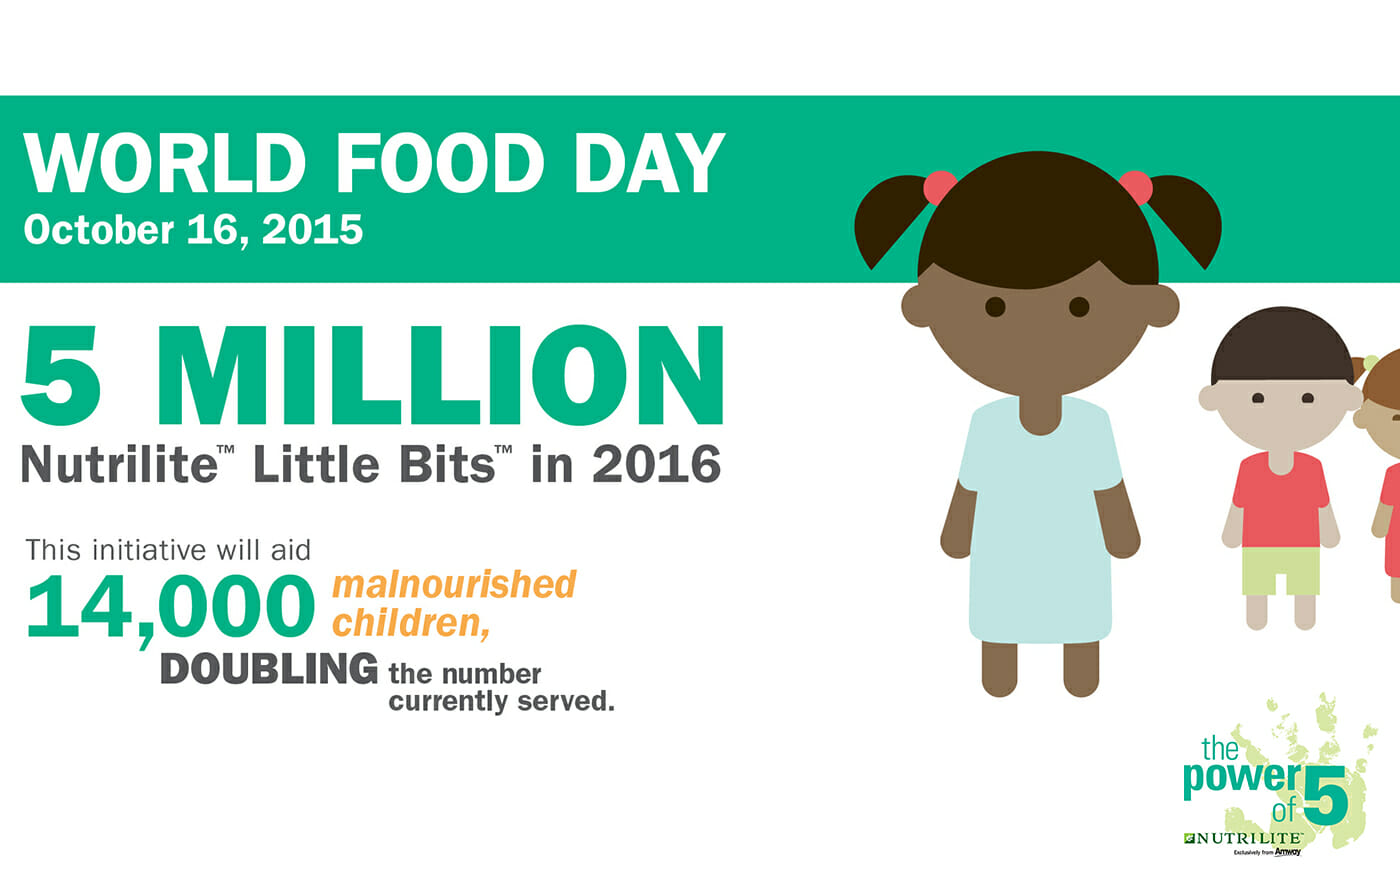 Amway sets a new goal in the fight against childhood malnutrition: provide 5 million Nutrilite™ Little Bits™